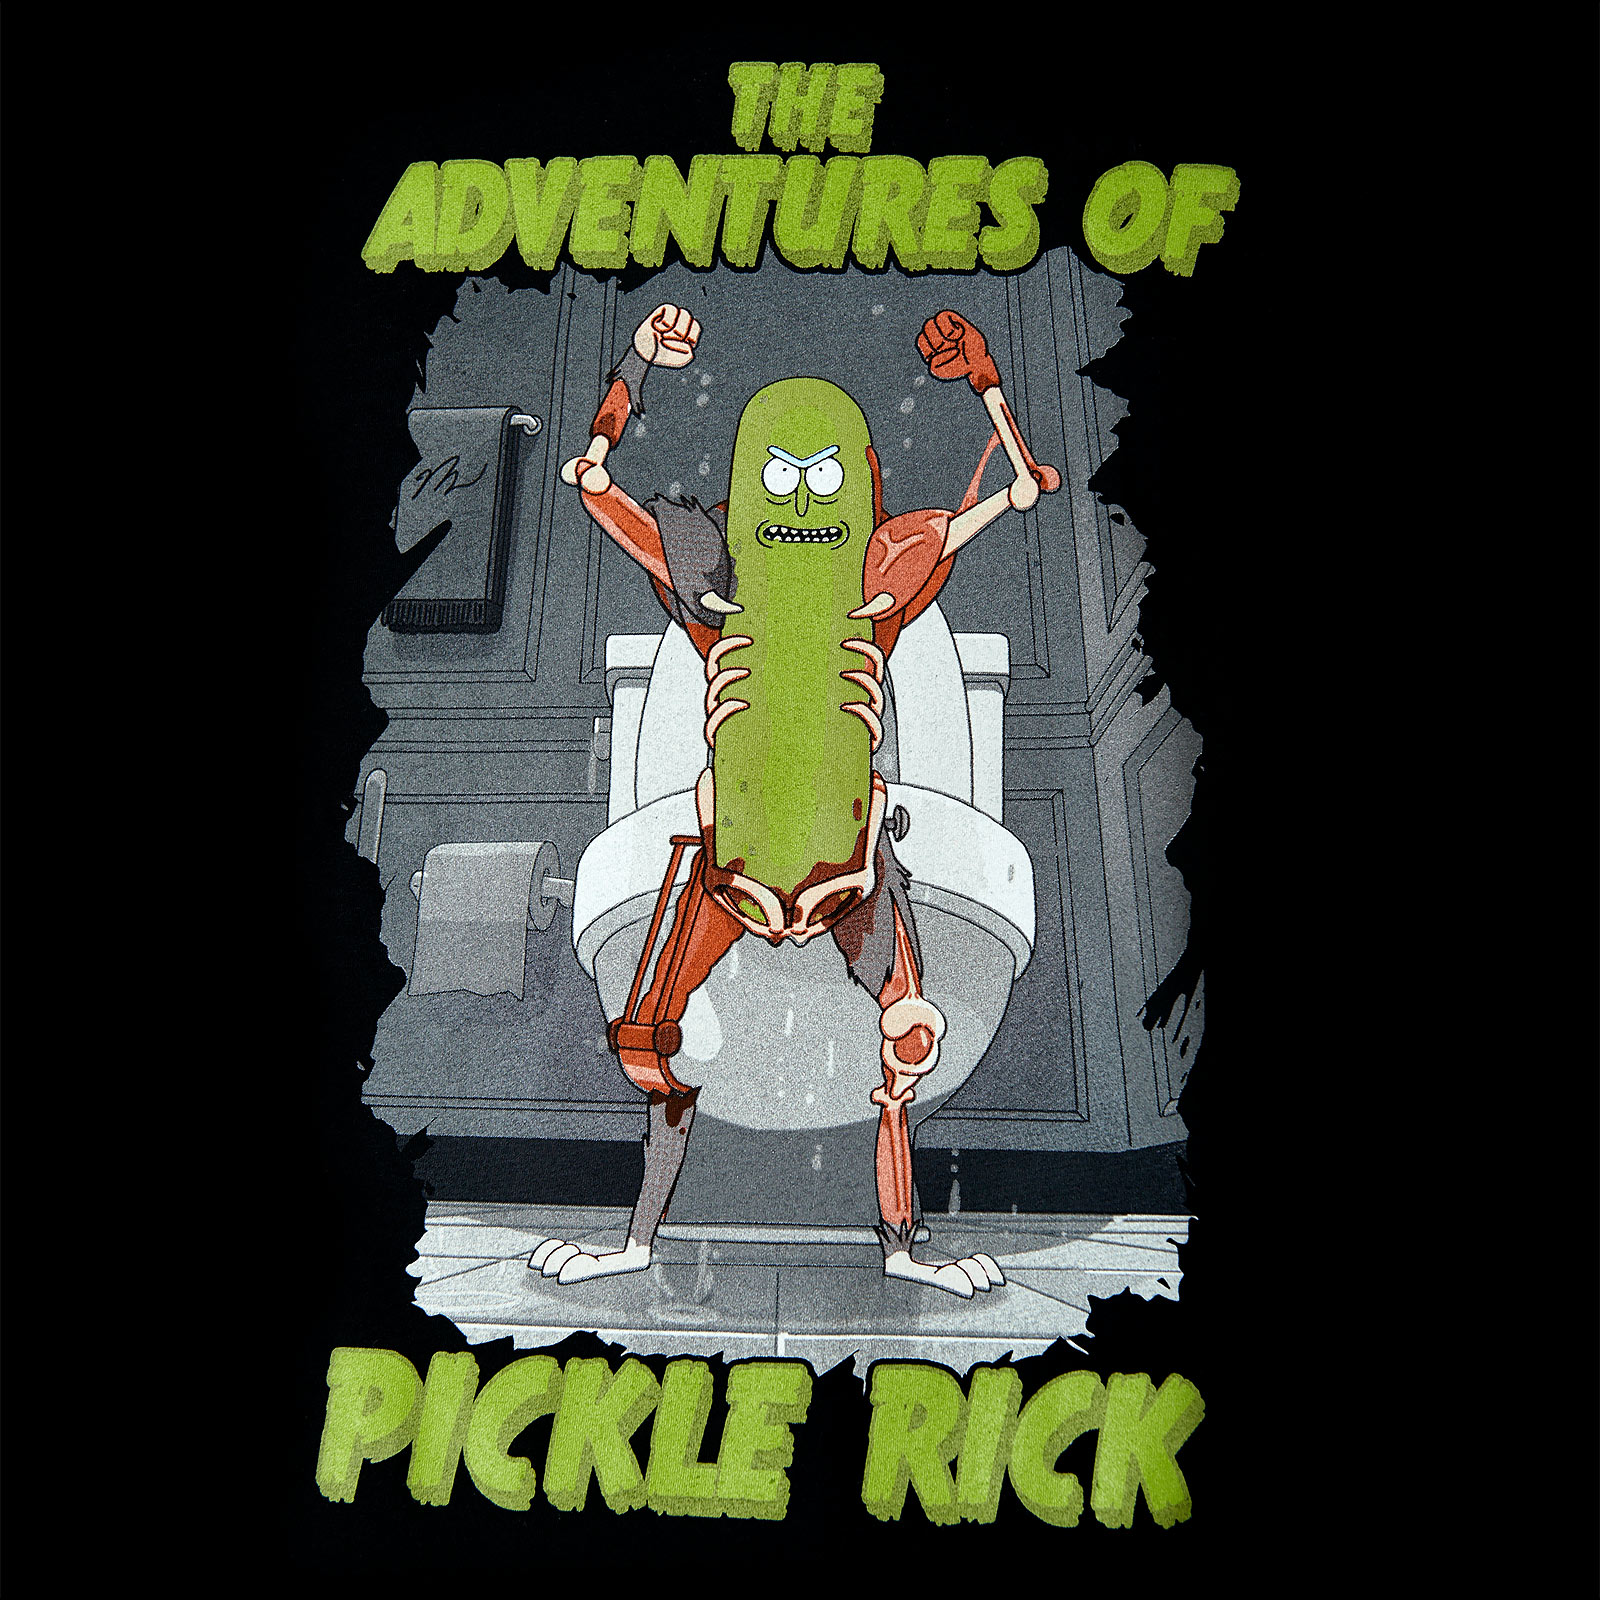 Rick and Morty - Adventures of Pickle Rick T-Shirt black